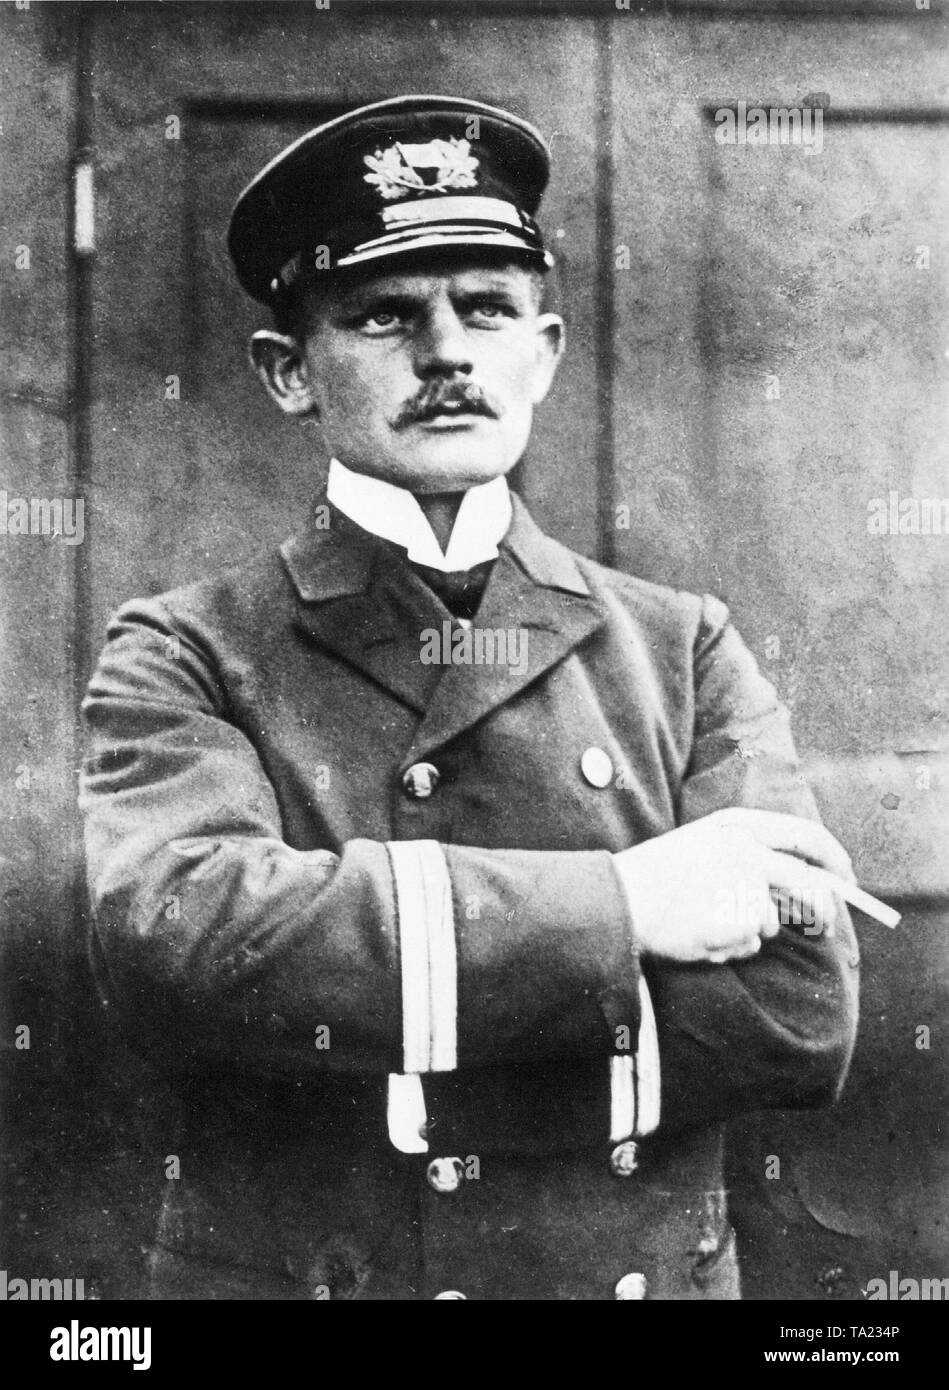 Oberleutnant zur See Carl Hans Lody - he worked as a German spy in England for the Secret Naval Intelligence Service of the Imperial German Navy. He was unmasked at the beginning of the 1st World War by the British and arrested, sentenced to death and later shot under martial law in the Tower in London. Stock Photo